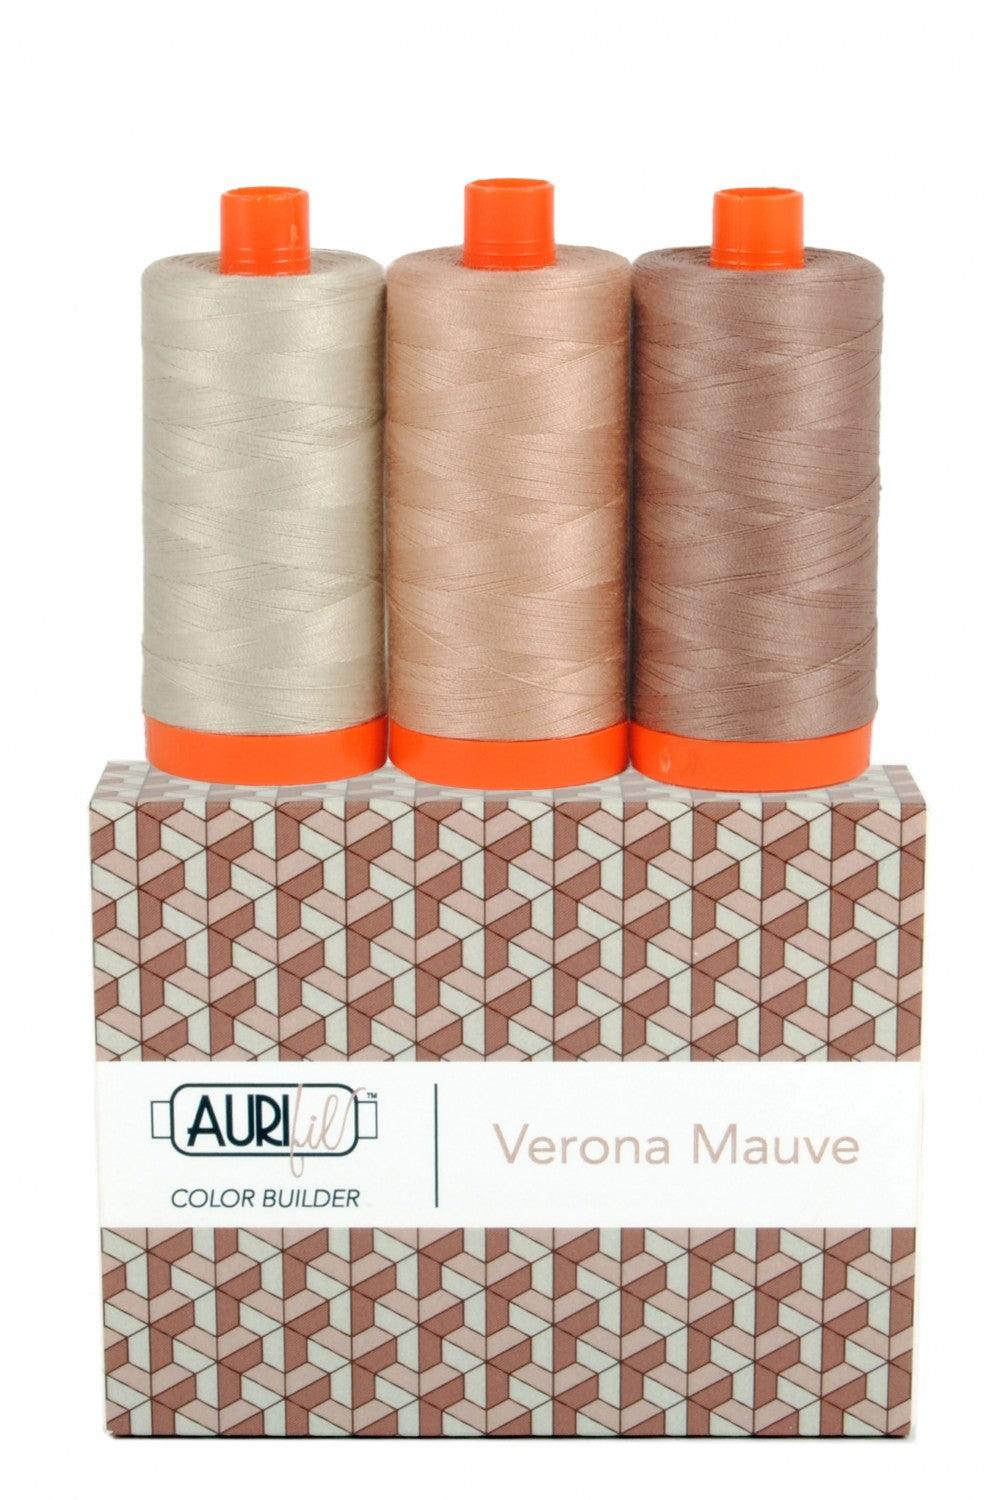 Verona Mauve, Color Builder, Aurifil, 1300m, Package of 3 - Kawartha Quilting and Sewing LTD.